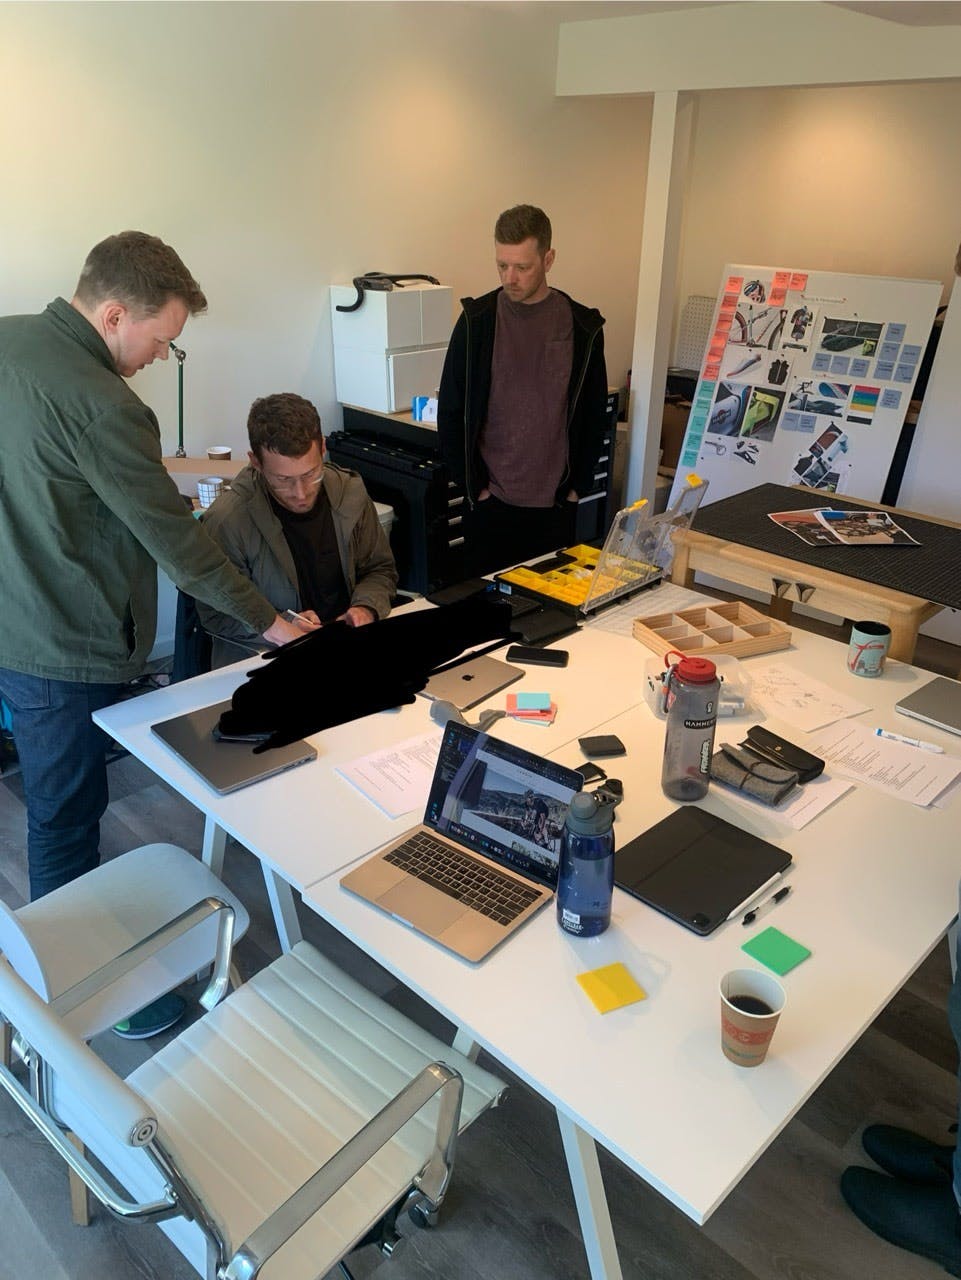 A photo of a design workshop being conducted